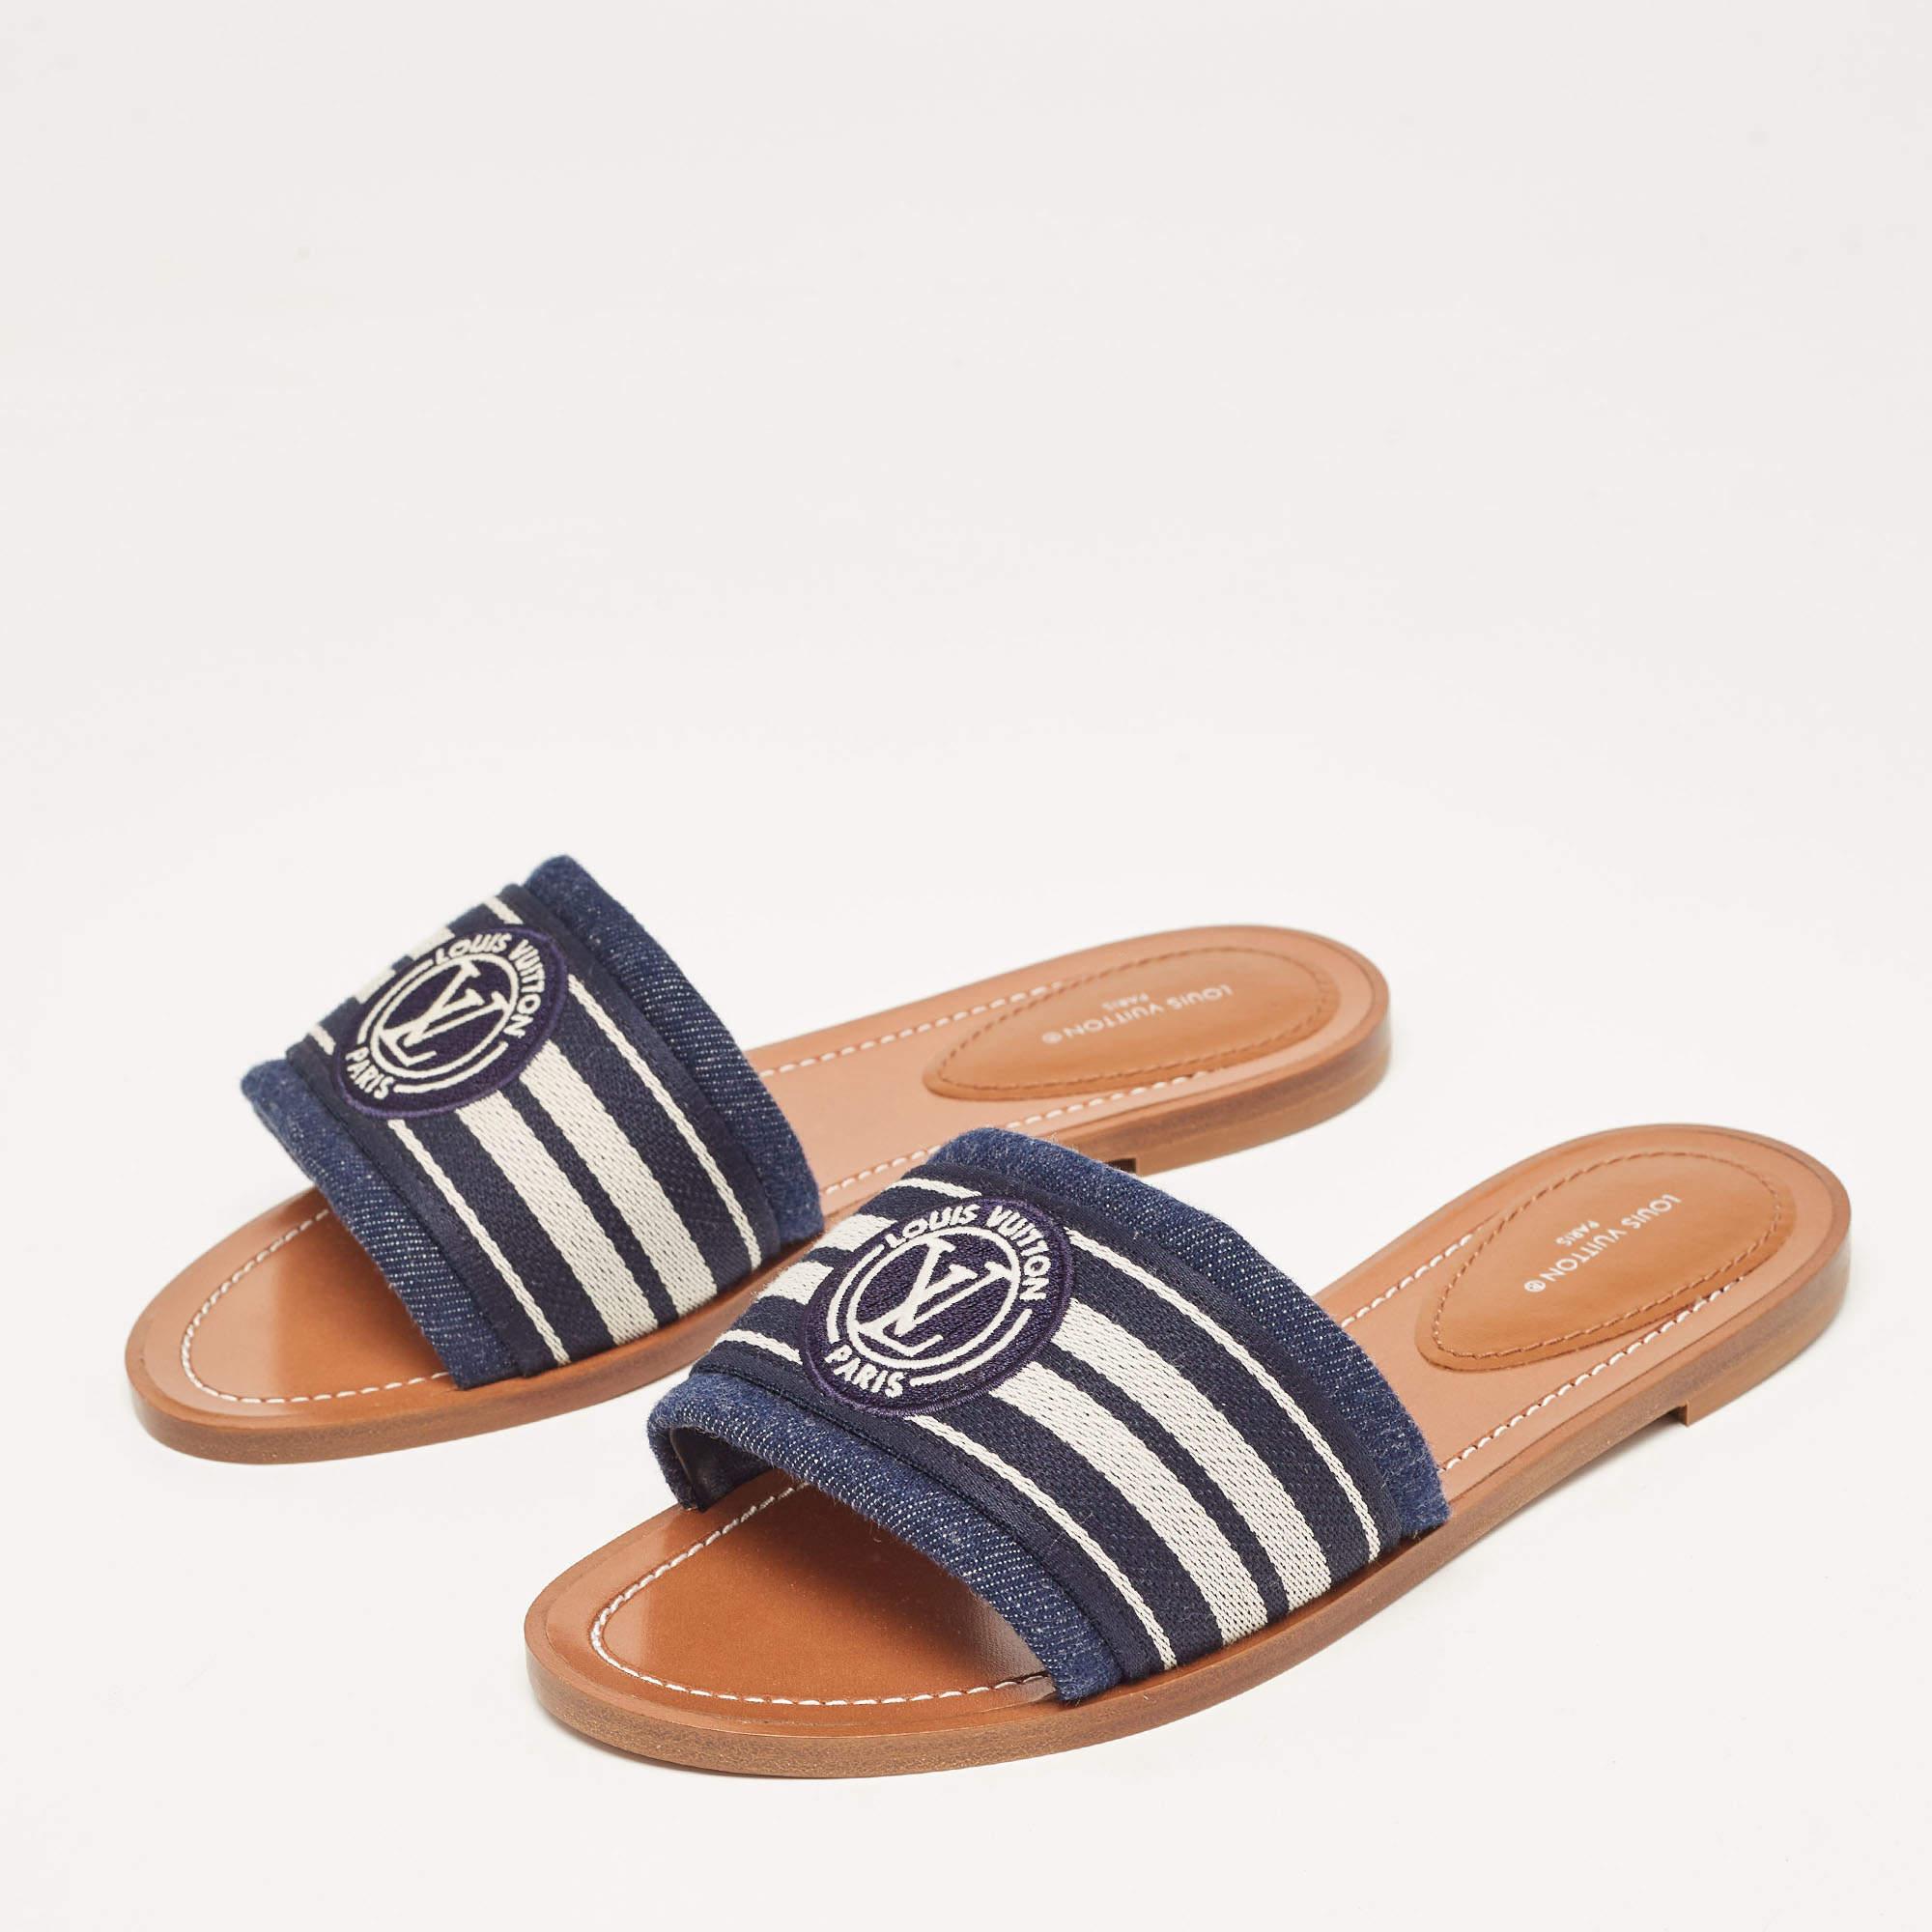 Enhance your casual looks with a touch of high style with these designer slides. Rendered in quality material with a lovely hue adorning its expanse, this pair is a must-have!

Includes: Original Dustbag